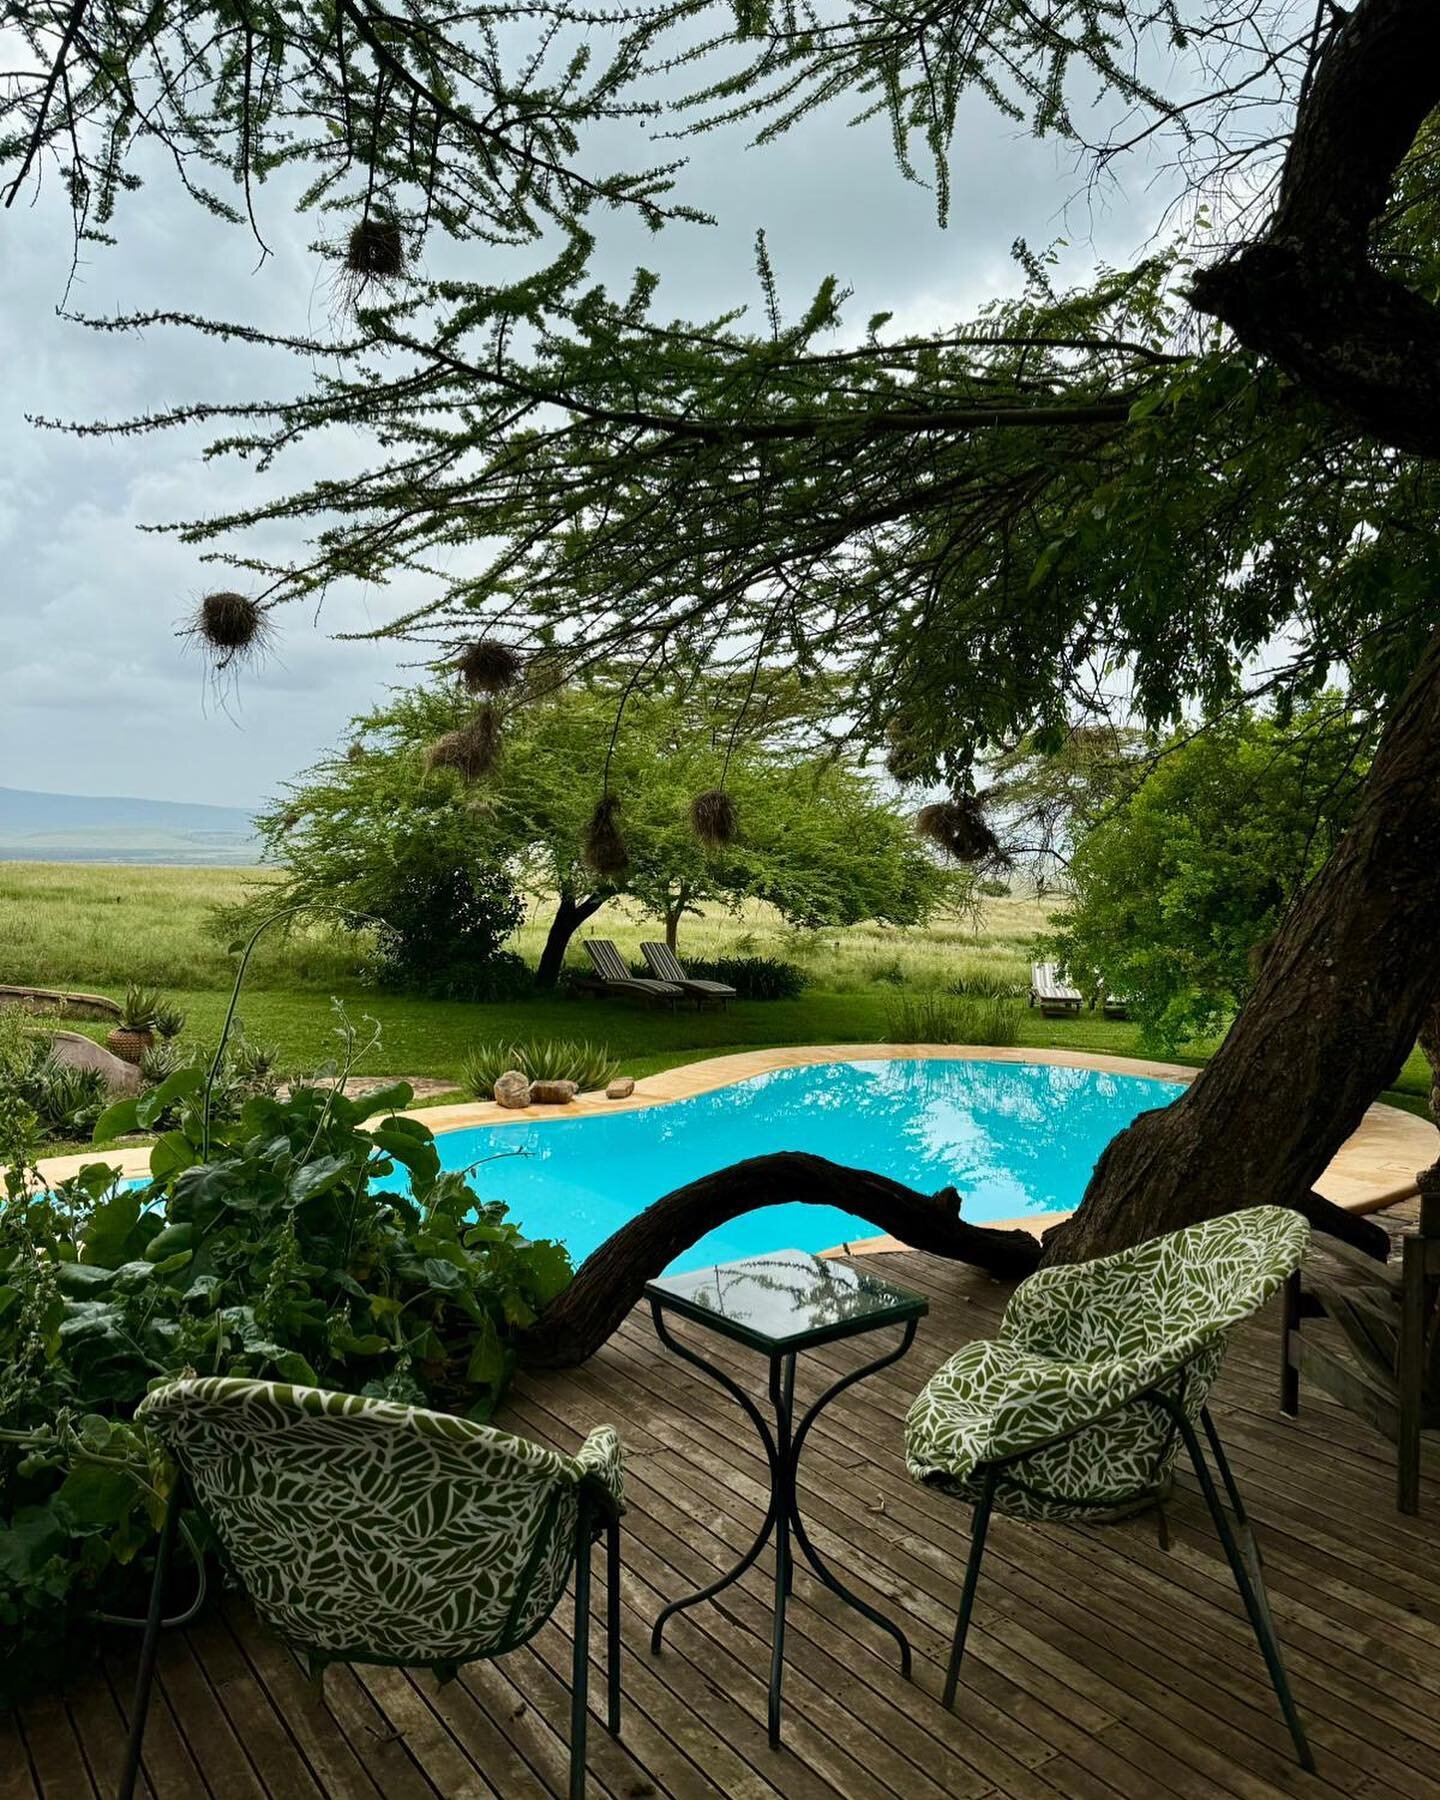 All the recent rains have left many parts of Kenya a vibrant shade of green. @lewa_house is in full bloom and looking like an oasis of calm and relaxation. Perfect for a Sunday &lsquo;chill&rsquo; session.

📸 @lewa_house 
📧 bookings@bush-and-beyond